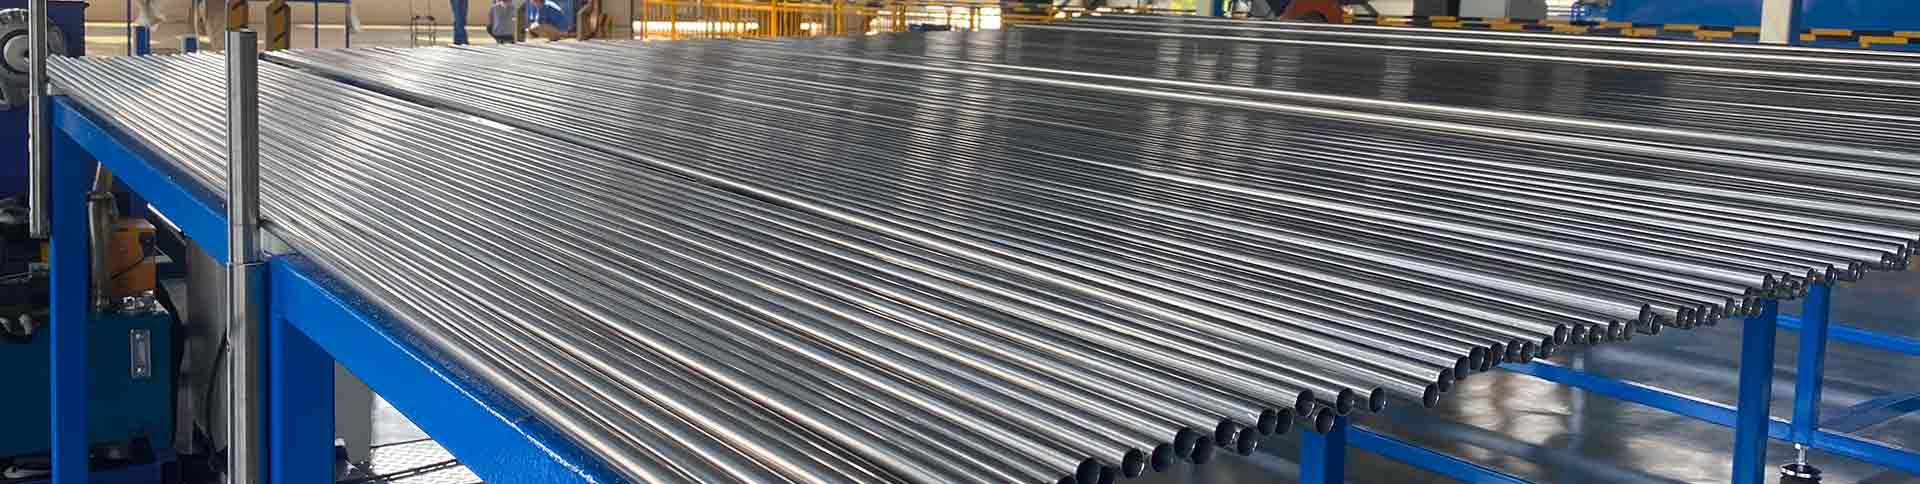 Stainless Steel Tubes Welding Techniques with Insulation and Corrosion Resistance Characteristics